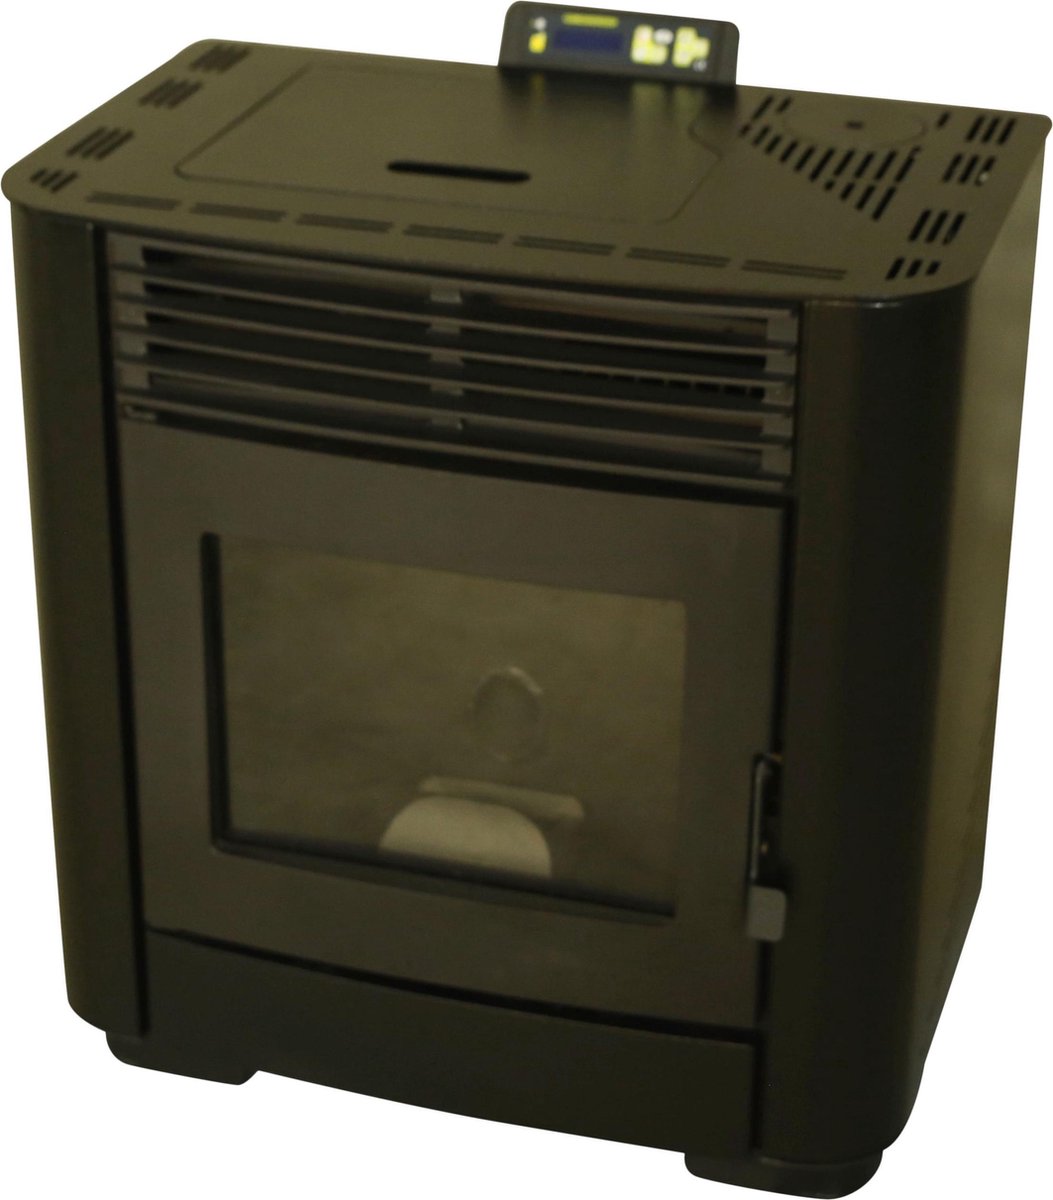 Ps-15-7 GRAND 12KW - JustFire